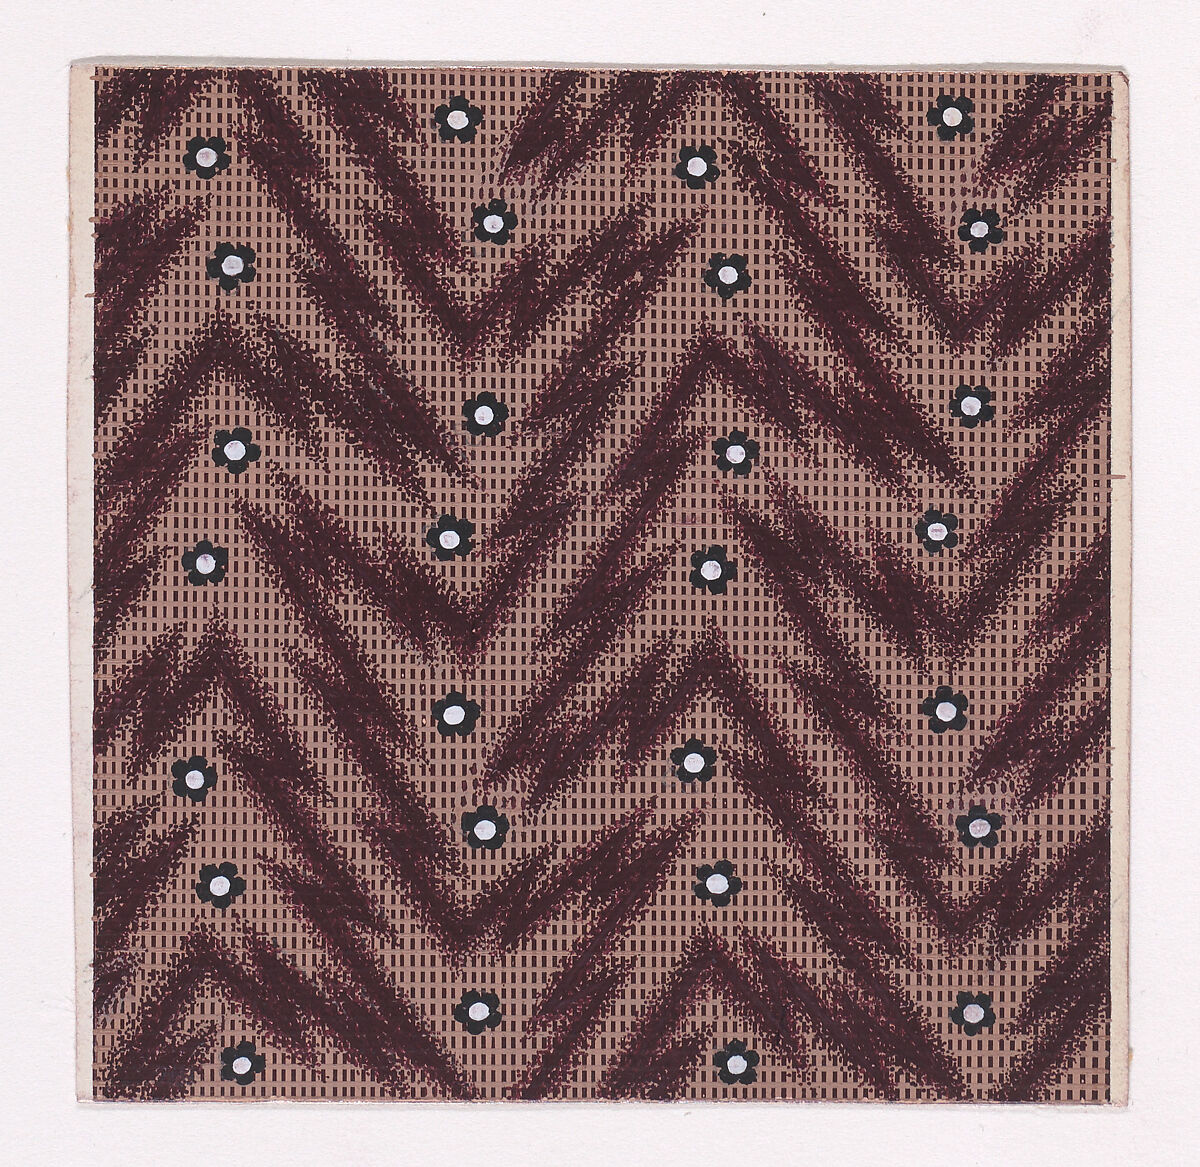 Textile Design with Rosettes and Pearls over a Checked Background with Zig-Zagging Lines, Anonymous, Alsatian, 19th century, Gouache 